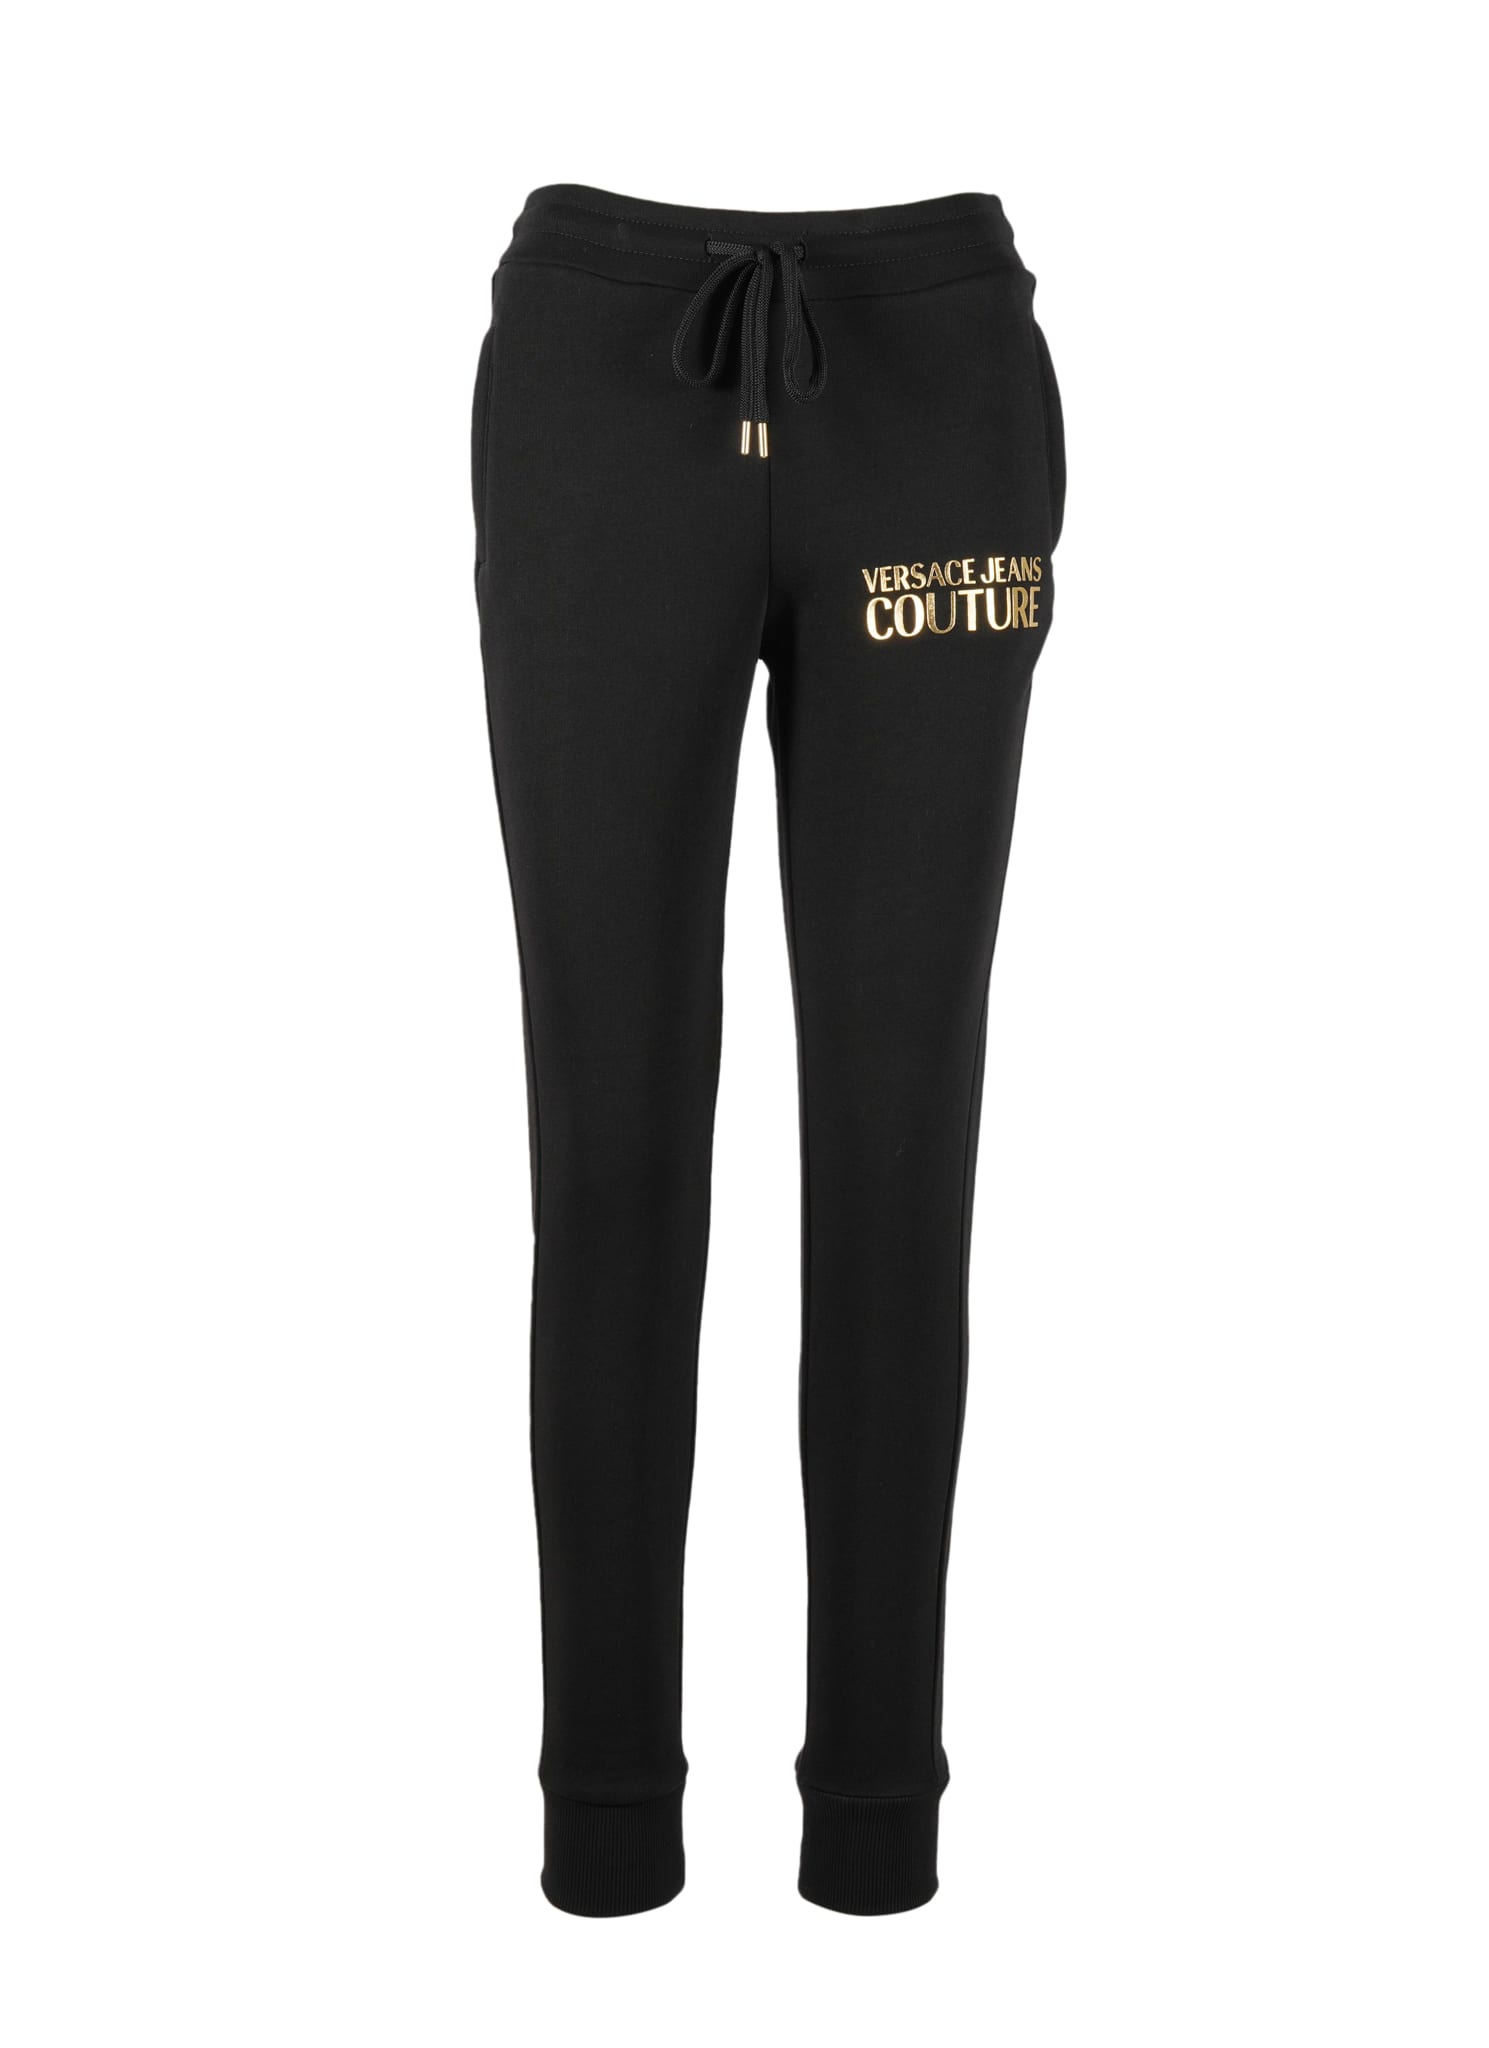 Versace Jeans Couture Trousers Sweatpants